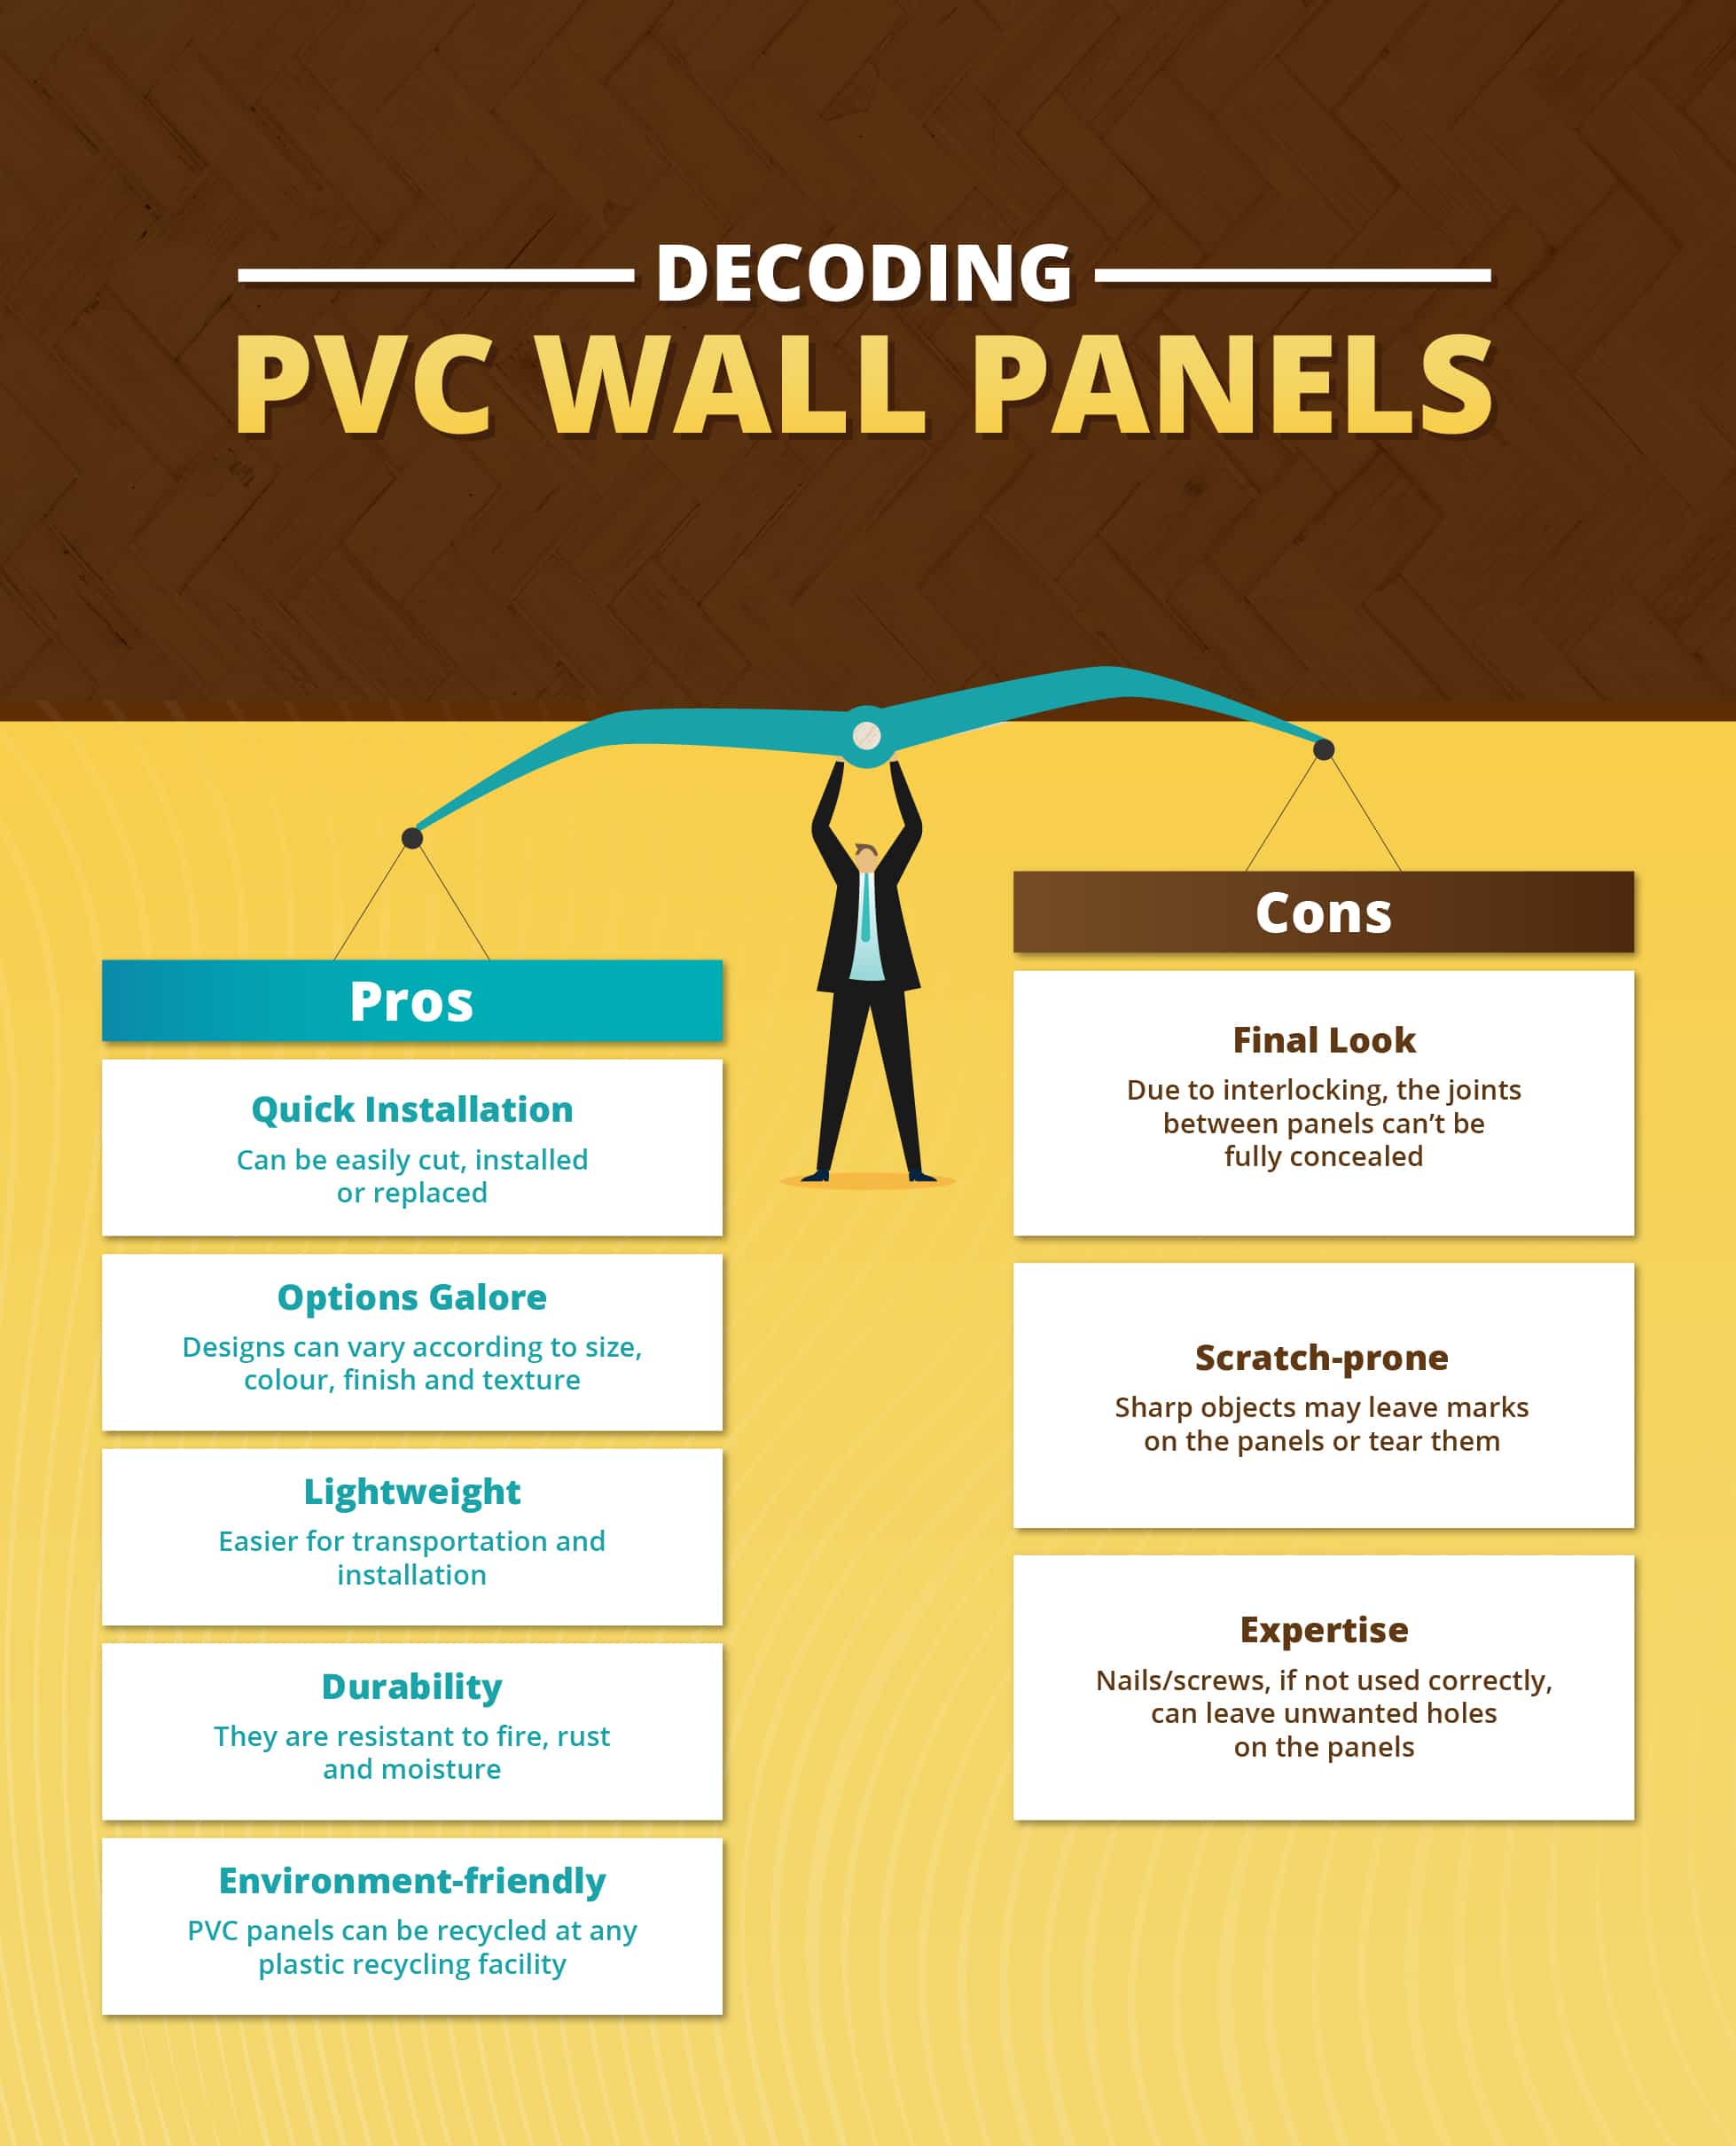 PVC wall panels pros and cons